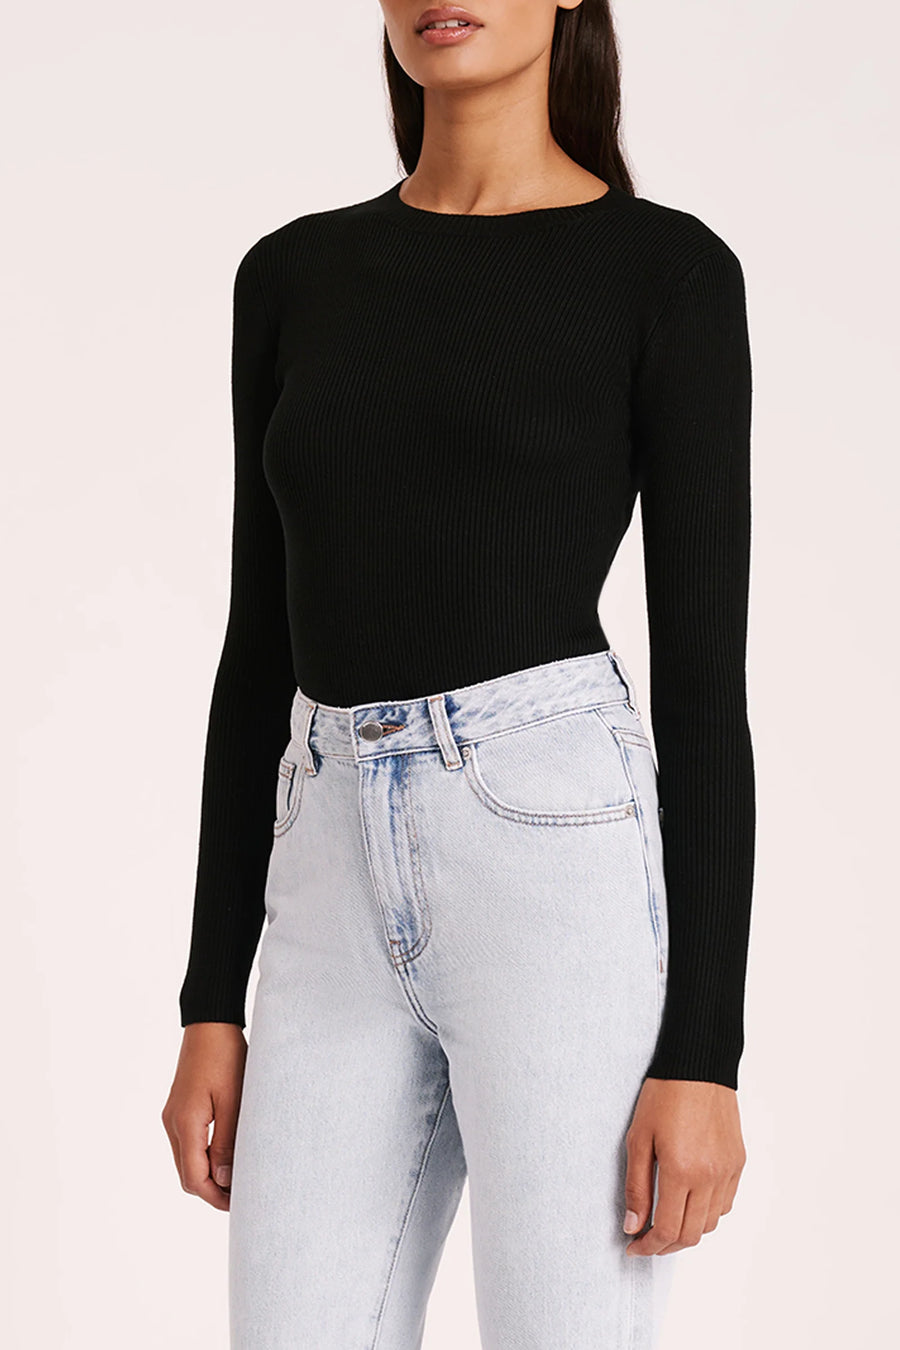 Classic Long Sleeve Knit in Black